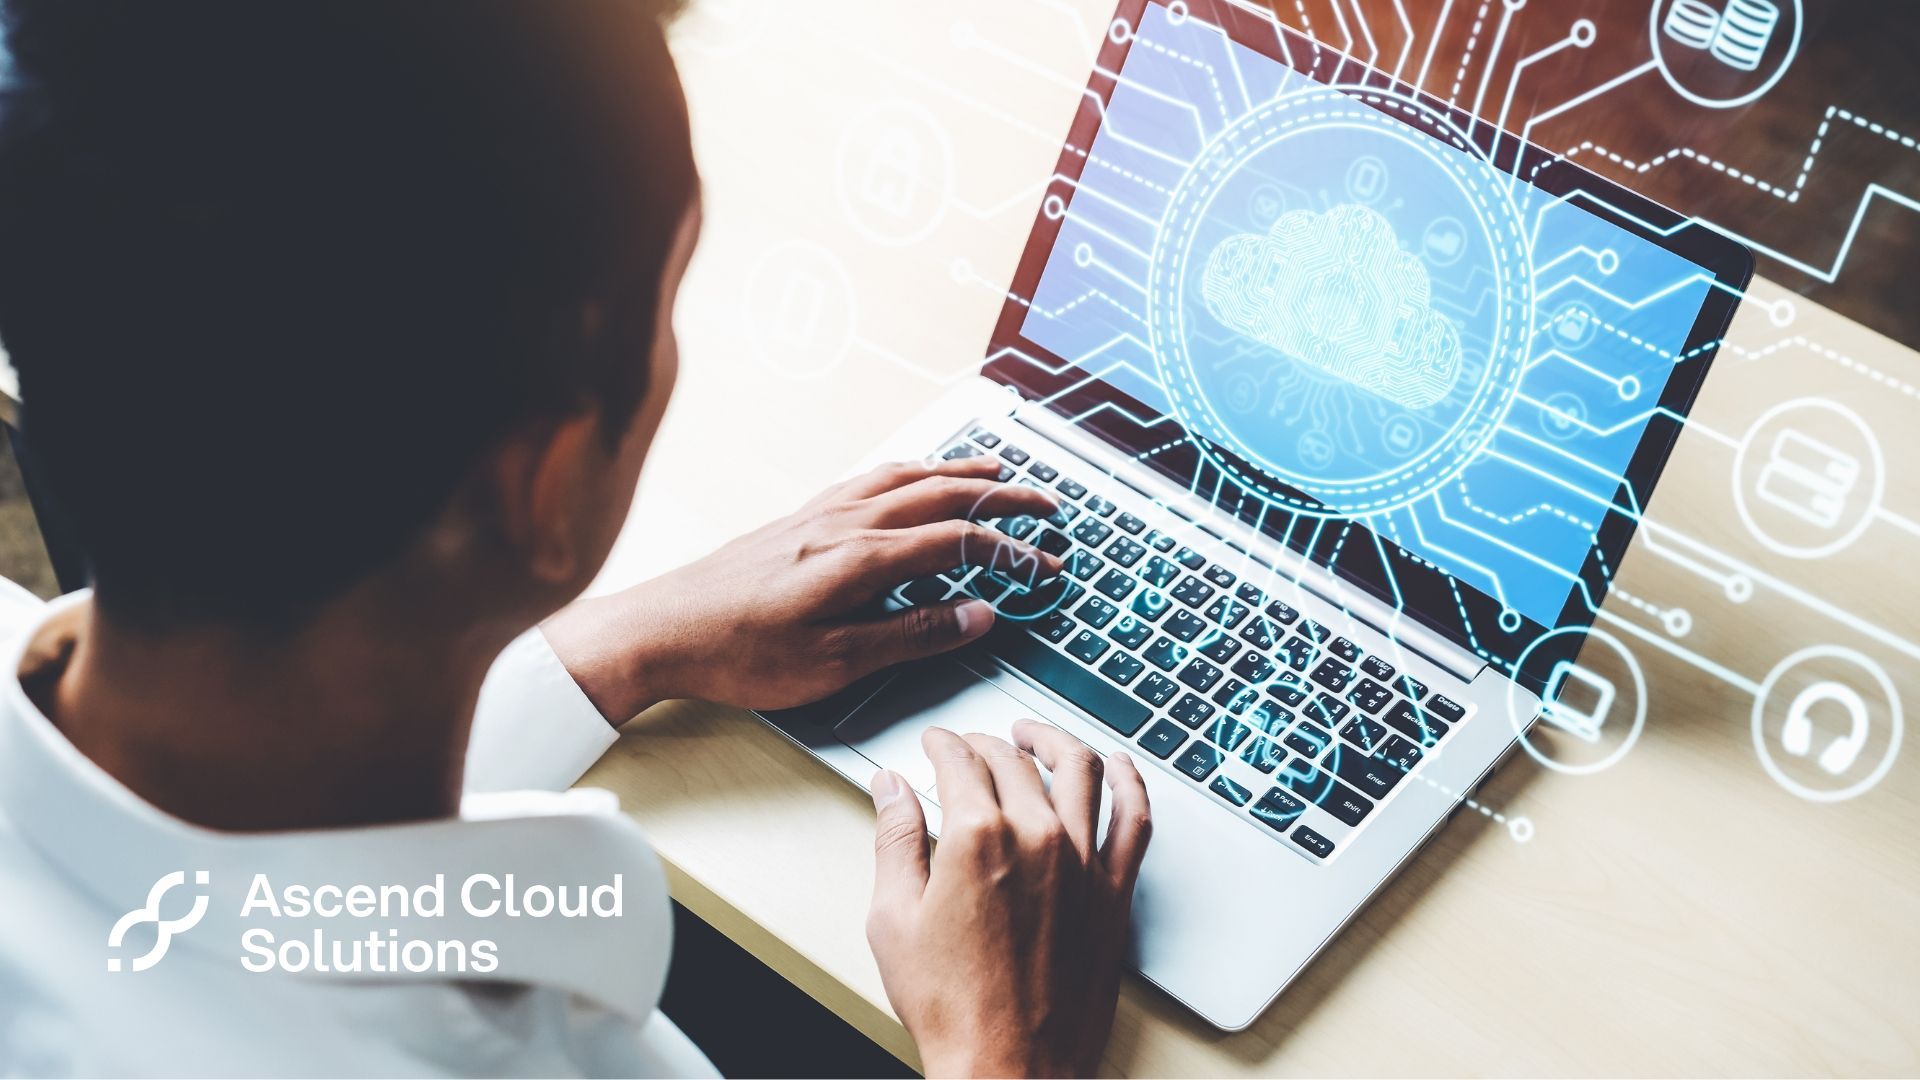 Why choose Oracle Cloud VMware Solution (OCVS) for your VMware migration? Learn 5 reasons in our blog.
